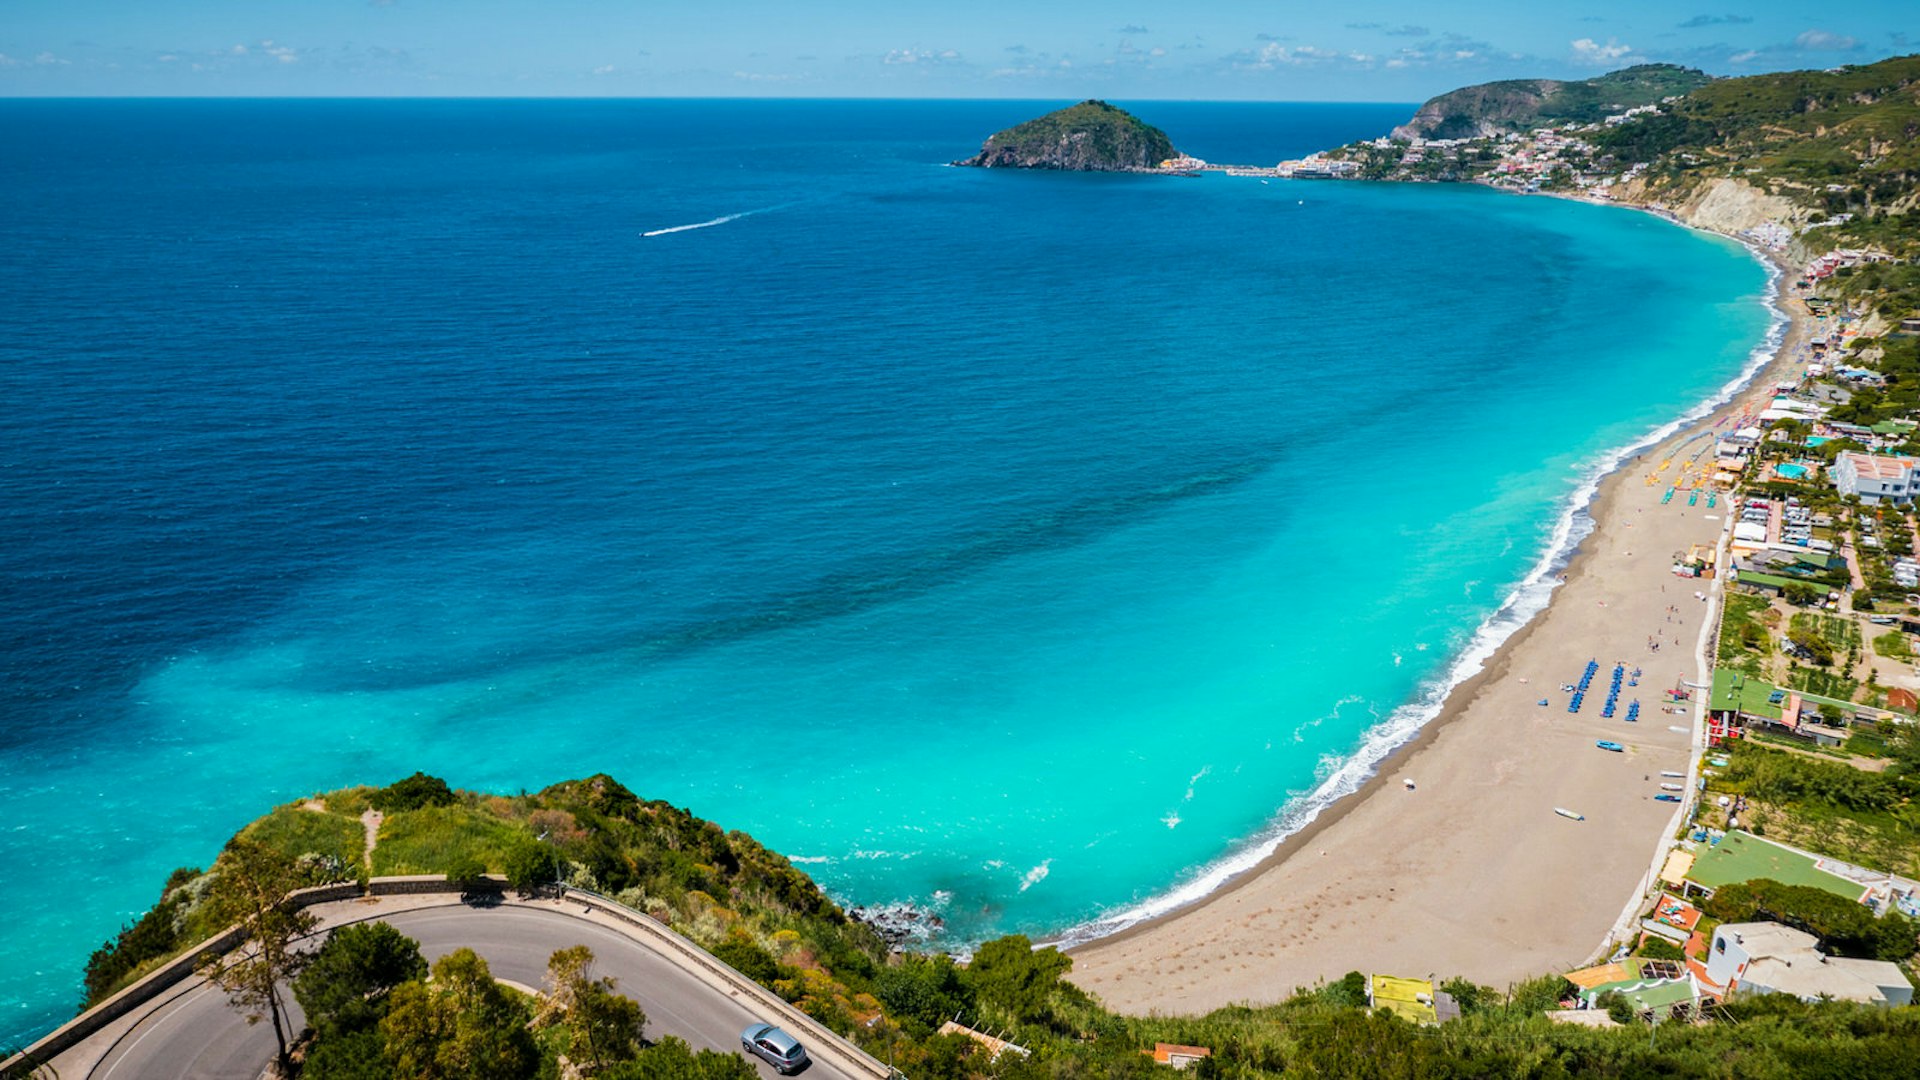 View of Spiaggia dei Maronti beach, on the south side of Ischia © elzauer / Getty Images